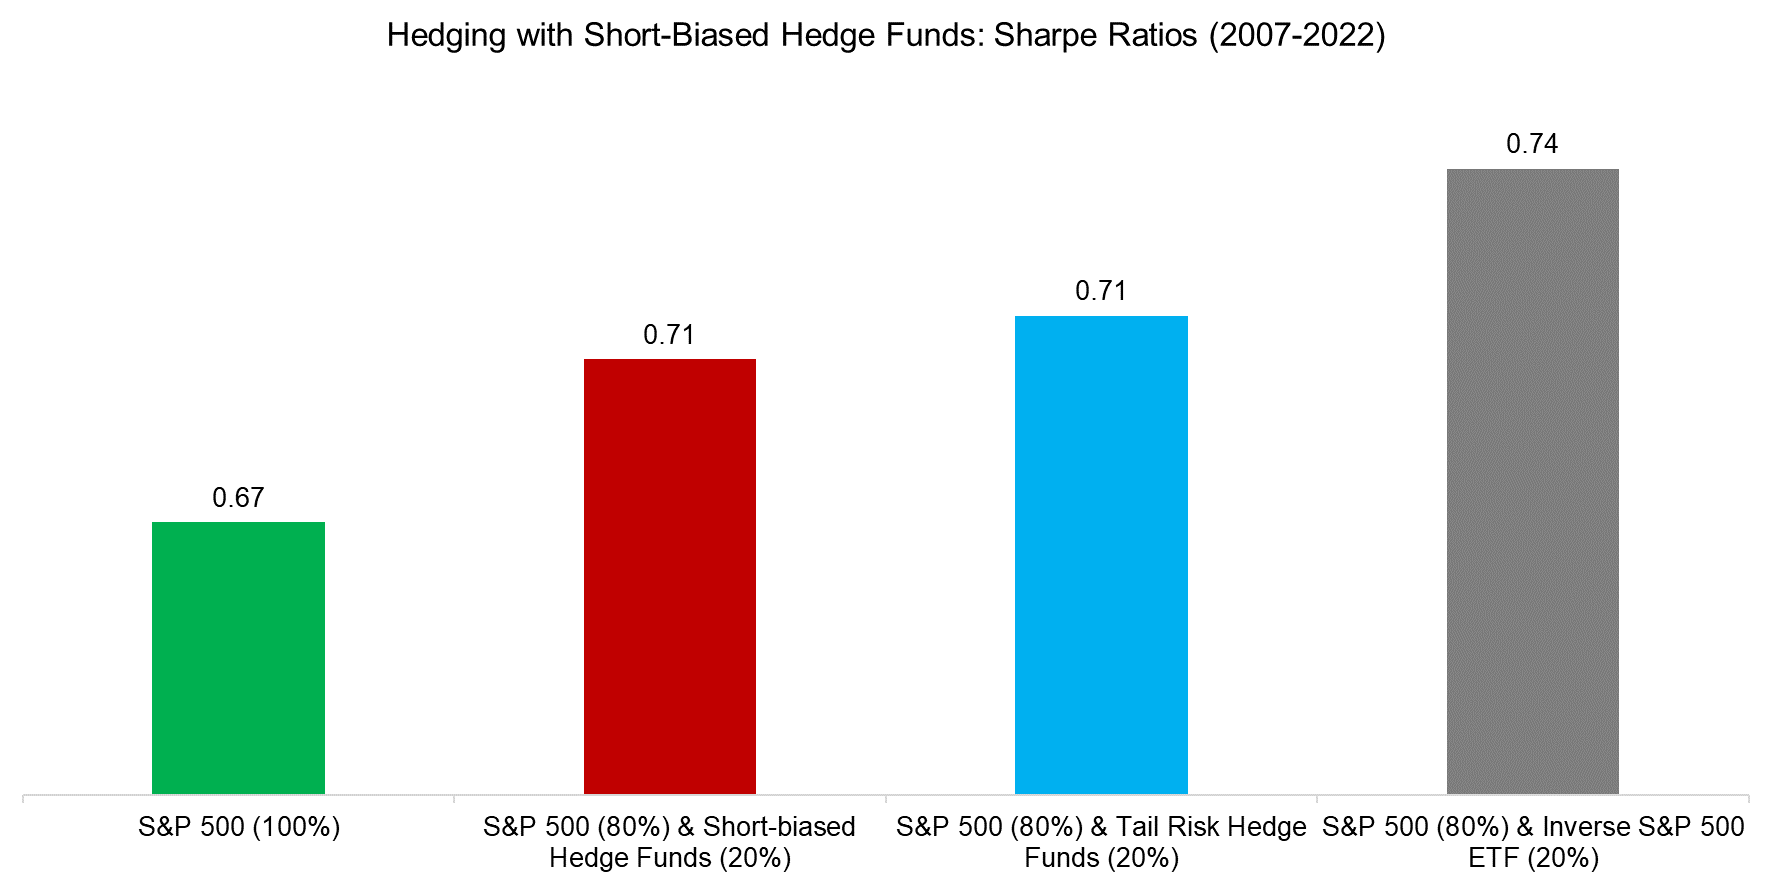 https://wps.factorresearch.com/wp-content/uploads/2022/09/Hedging-with-Short-Biased-Hedge-Funds-Sharpe-Ratios-2007-2022.png